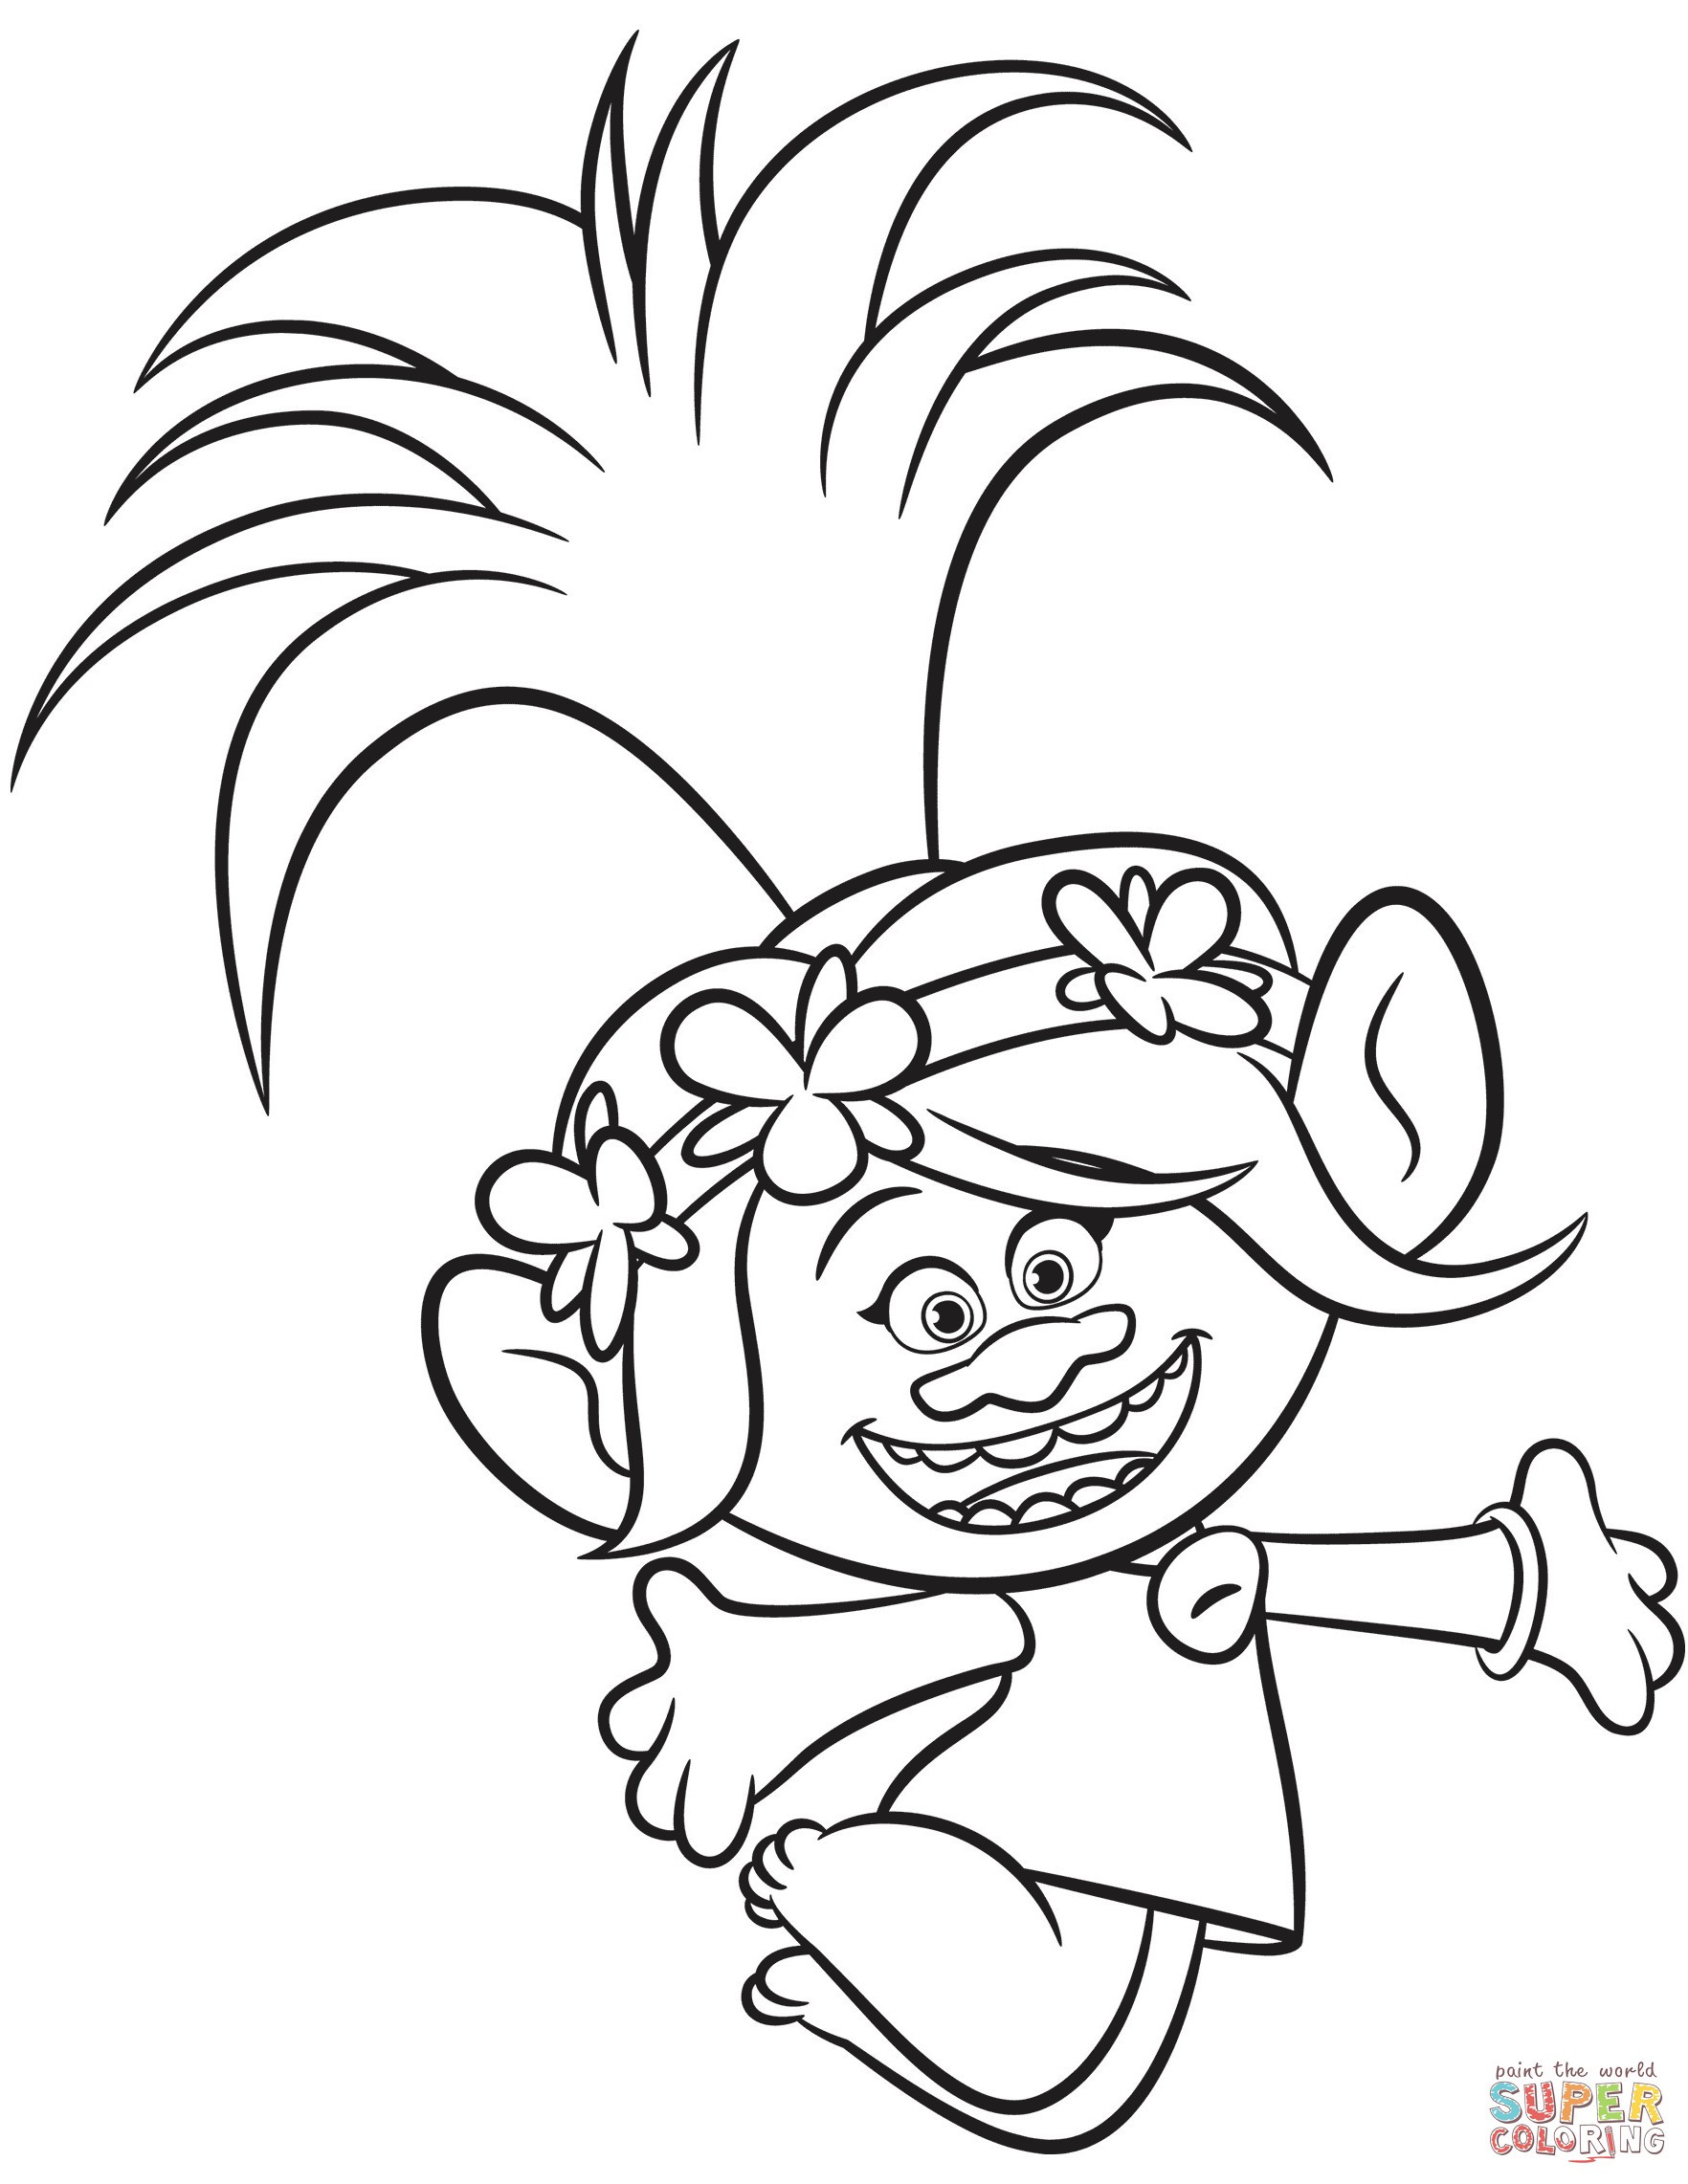 Poppy From Trolls 2 Coloring Page 20 Troll